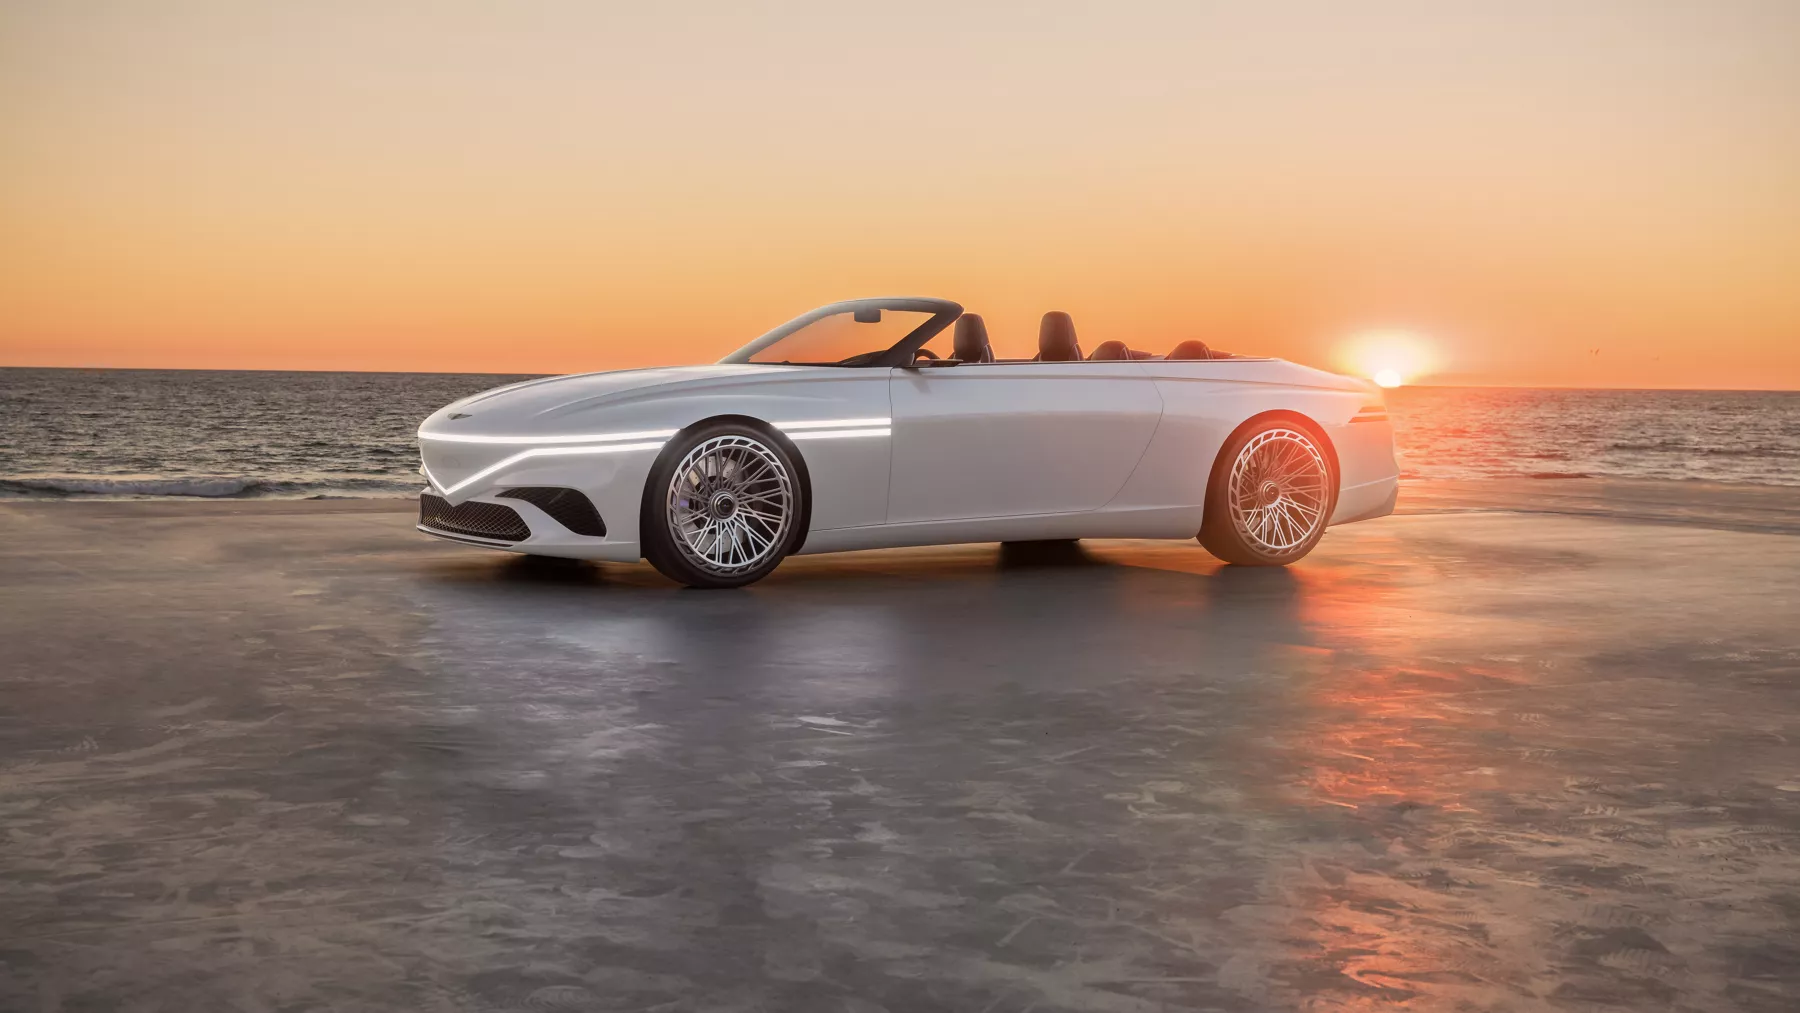 X Convertible Concept in front of a dramatic ocean sunset. 